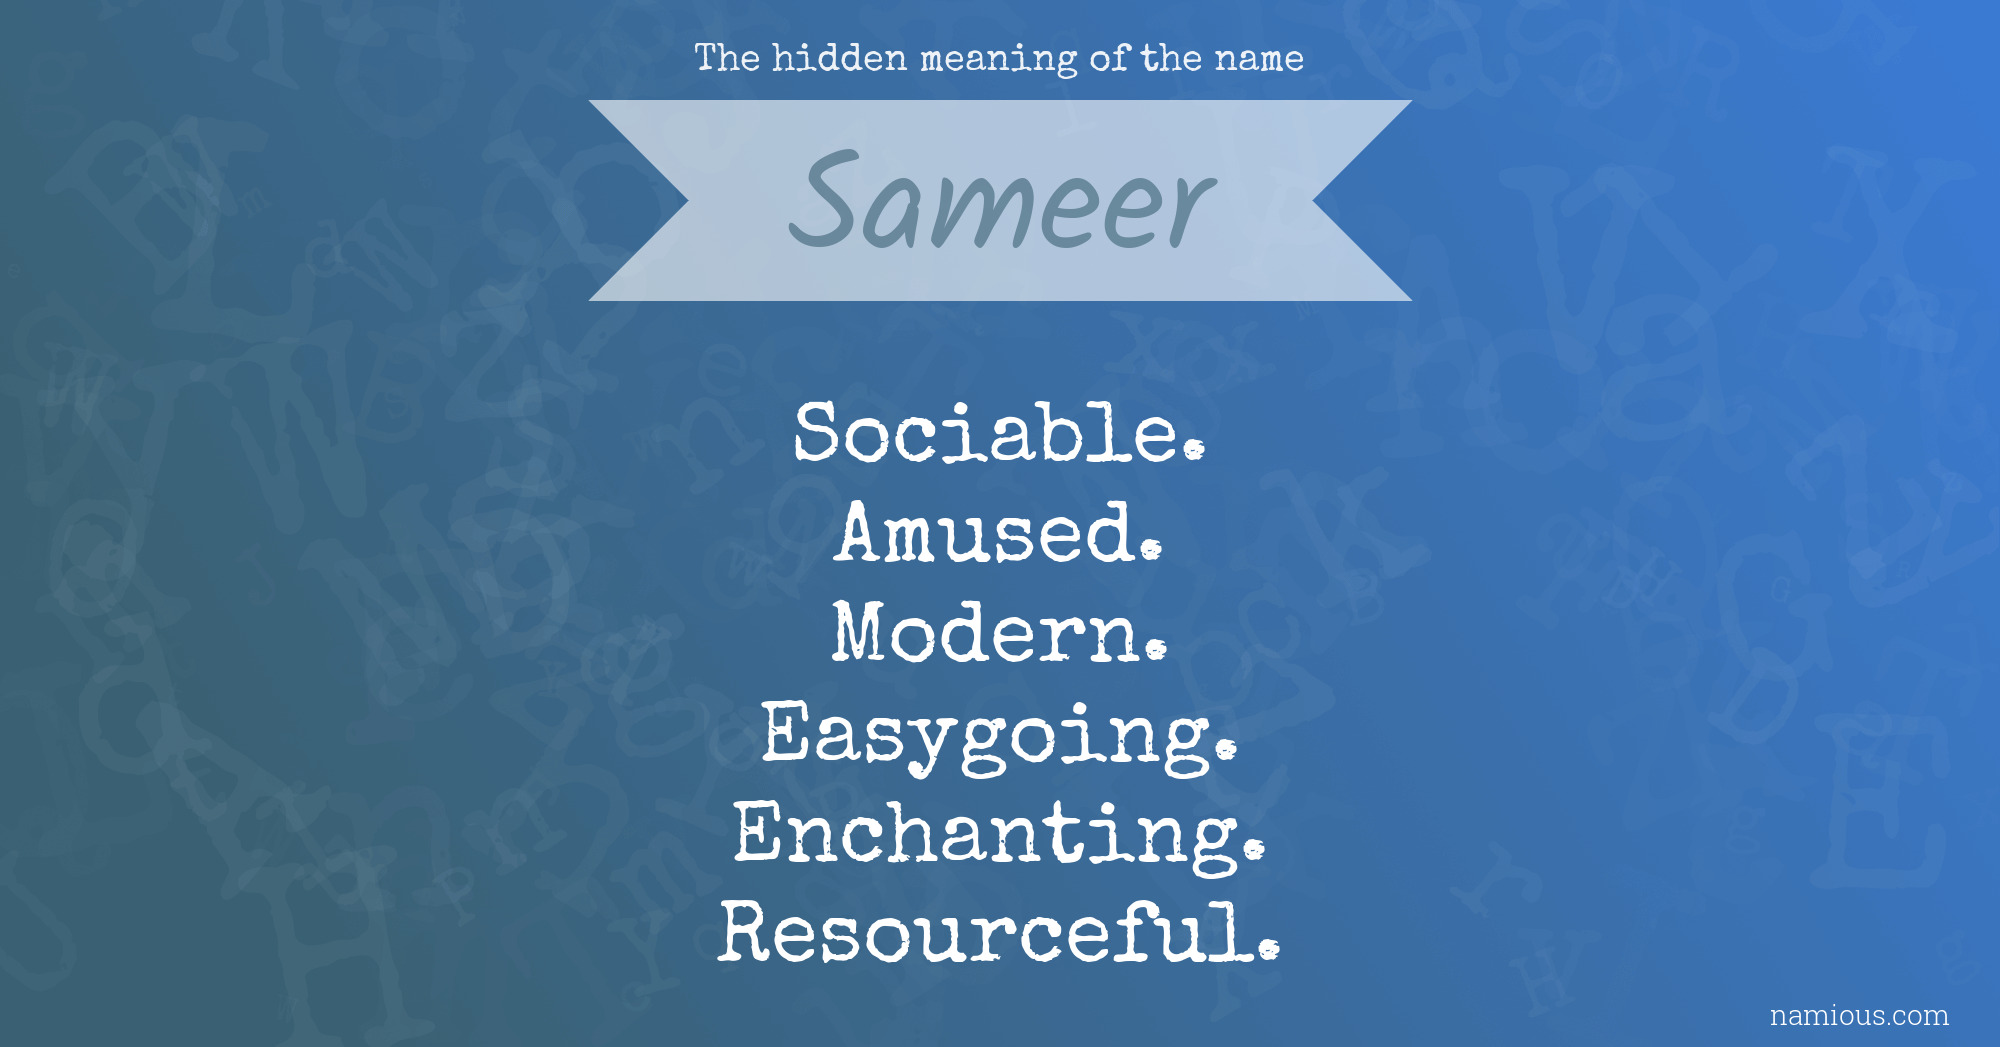 The hidden meaning of the name Sameer